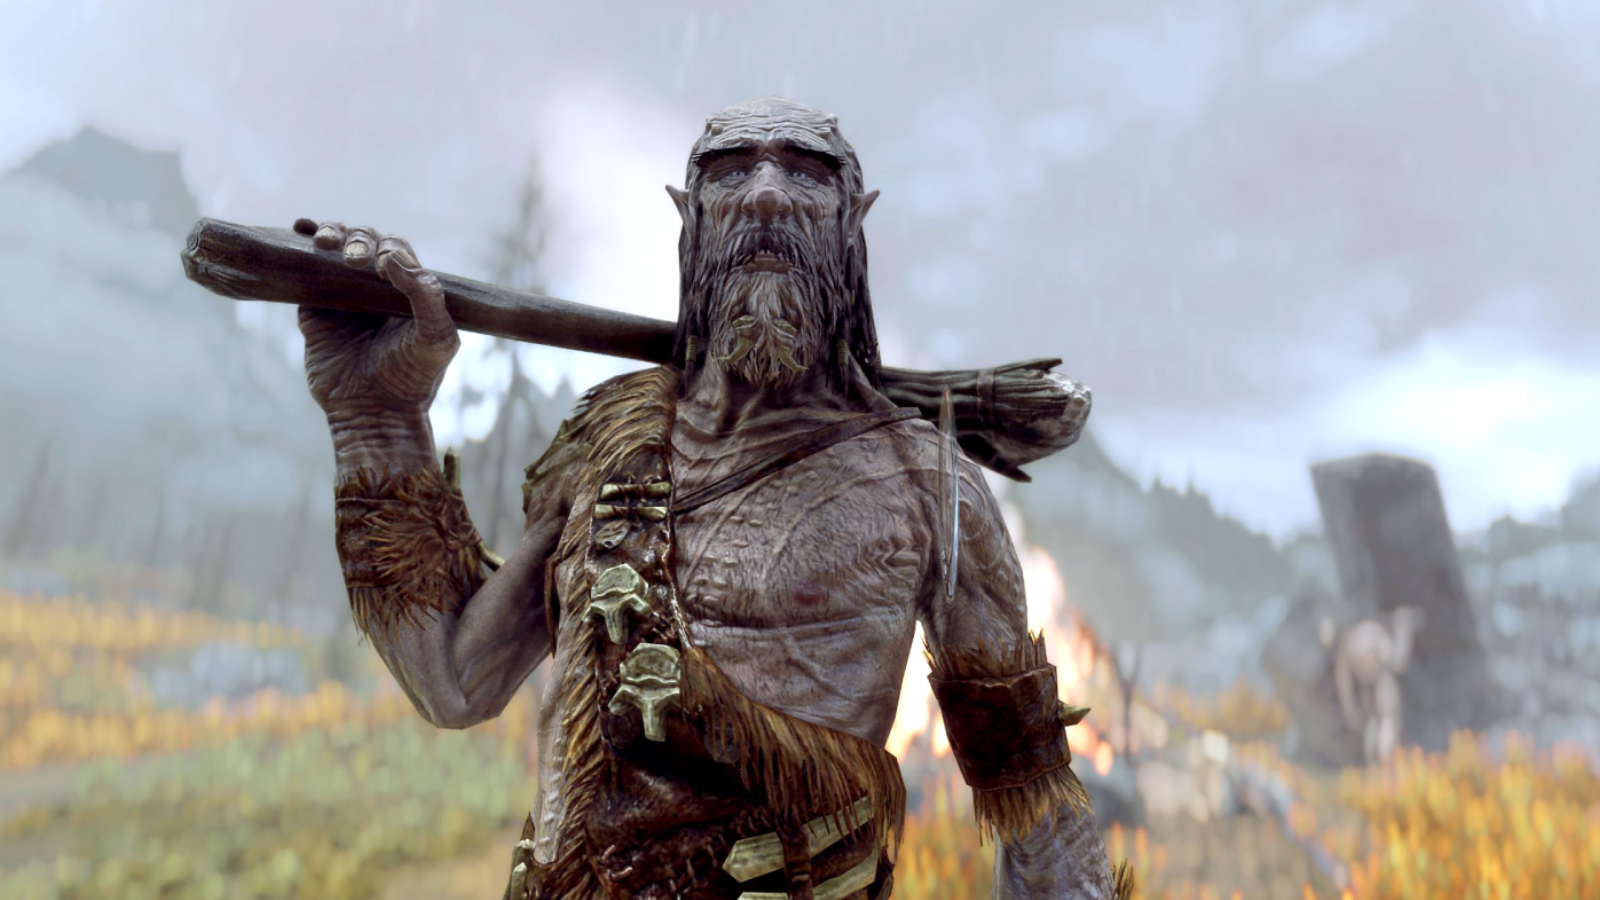 Skyrim Gets Shadow Of Mordor's Nemesis System Thanks To Fans